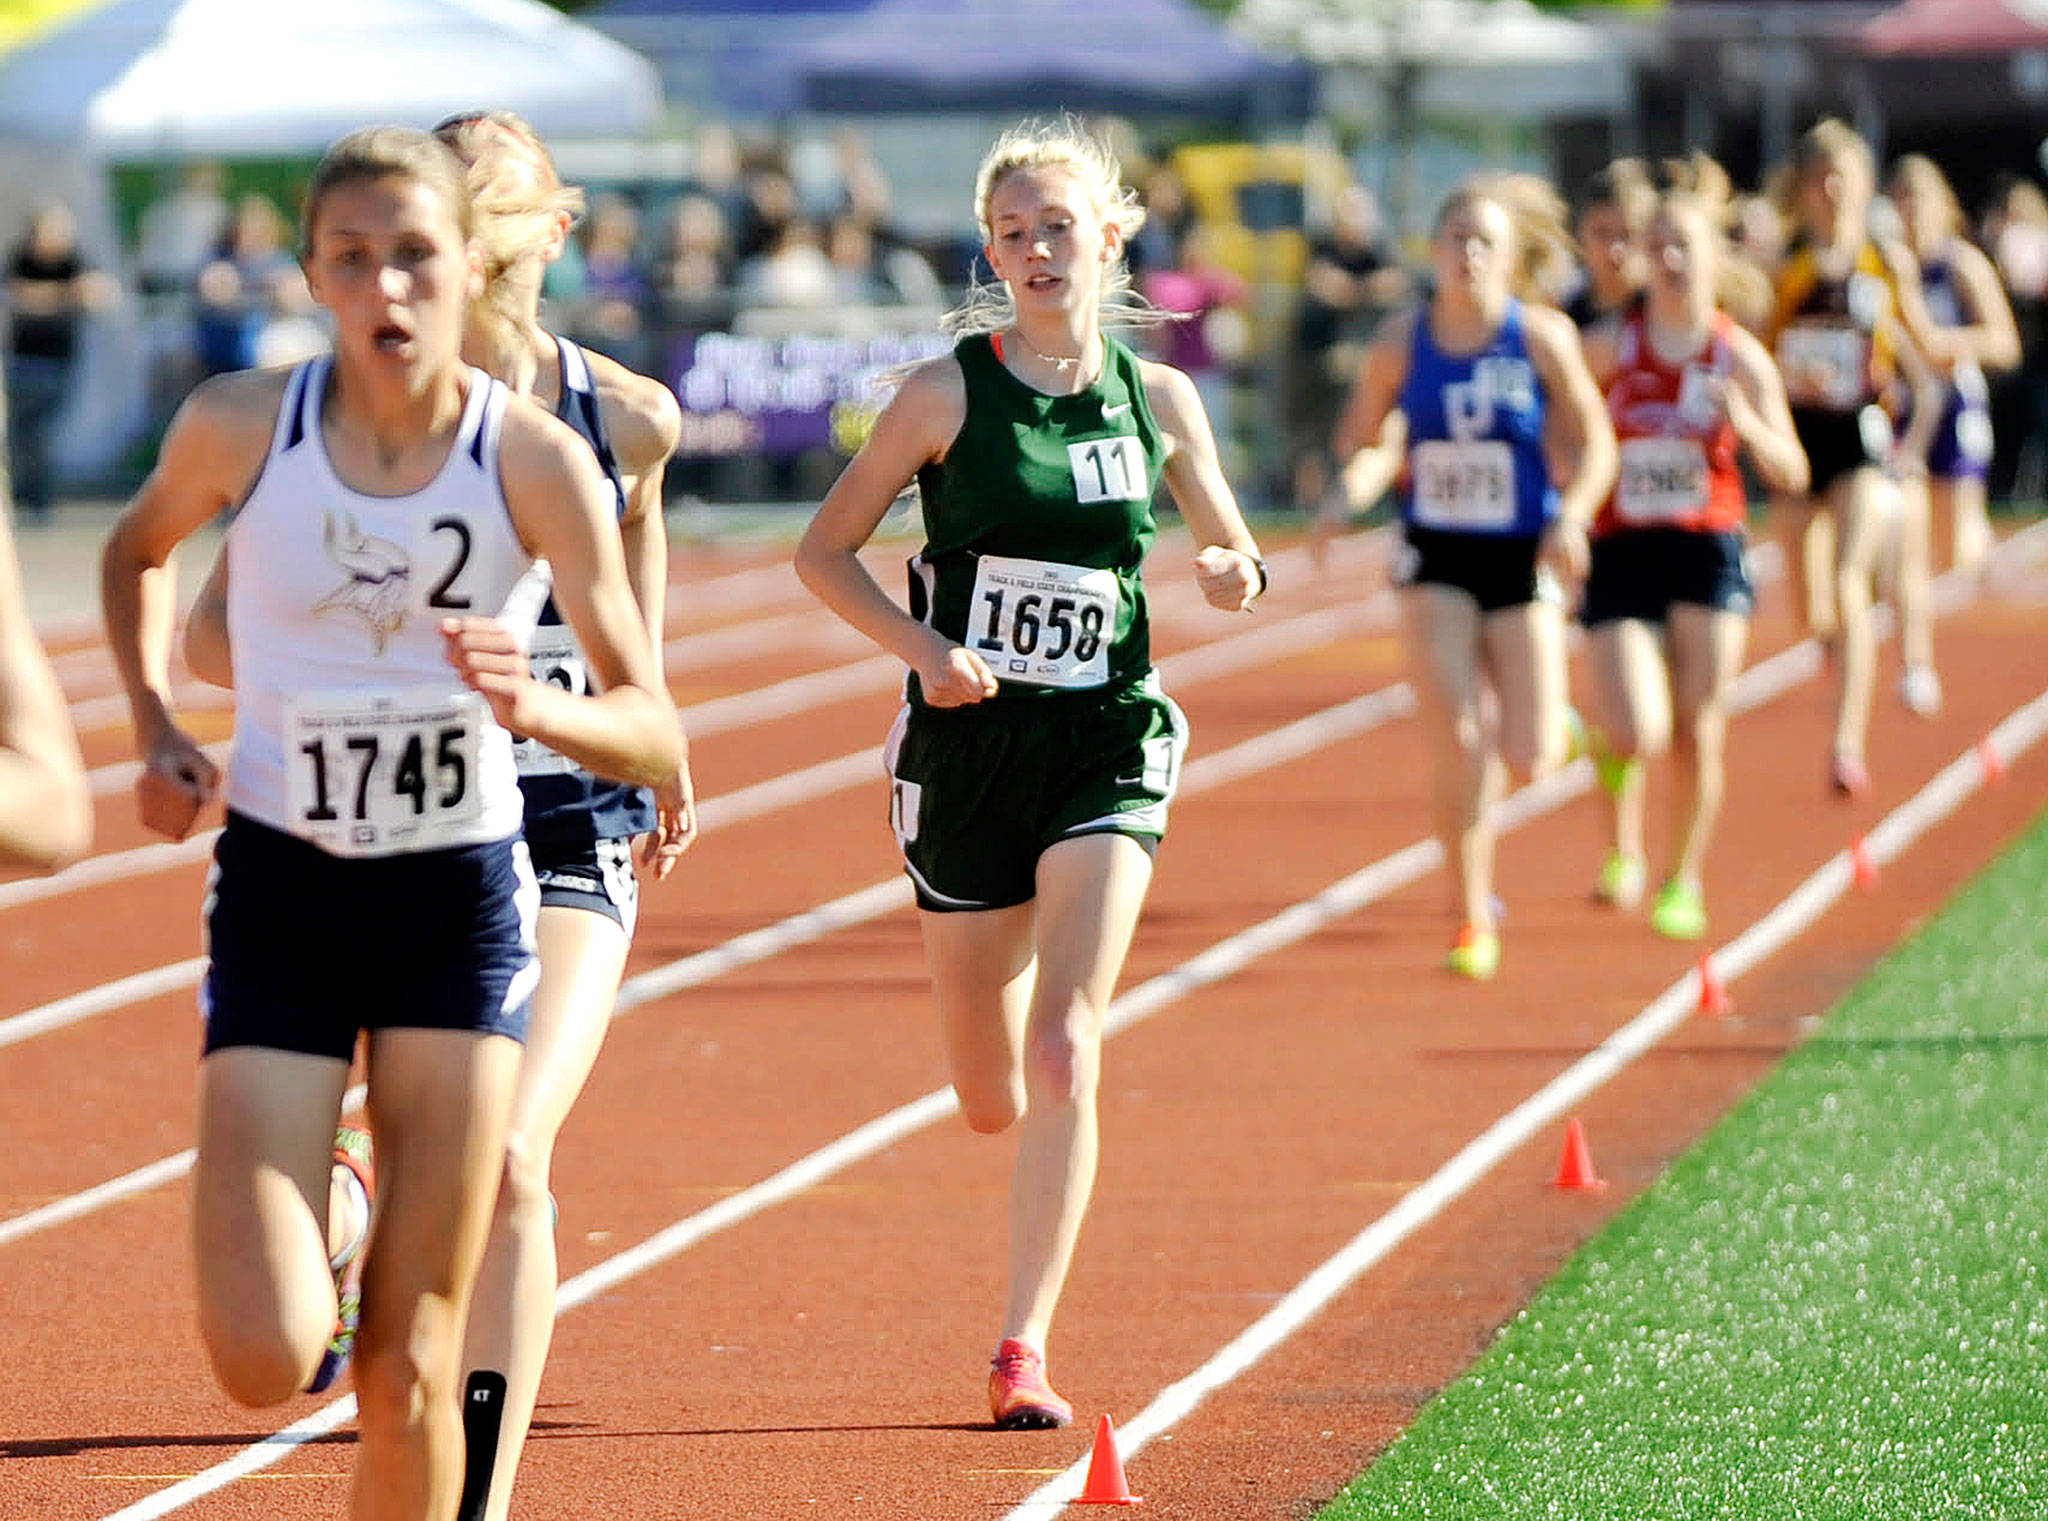 Port Angeles’ Gracie Long (in green) running at the state 2A Track and Field Championships at Mount Tahoma High School last month. Long finished fifth in the 3,200 meters and seventh in the 1,600 meters, breaking 30-year-old Port Angeles school records in both events.                                Michael Dashiell/Olympic Peninsula News Group                                Michael Dashiell/Olympic Peninsula News Group Port Angeles’ Gracie Long (in green) running at the state 2A Track and Field Championships at Mount Tahoma High School last month. Long finished fifth in the 3,200 meters and seventh in the 1,600 meters, breaking 33-year-old Port Angeles school records in both events.